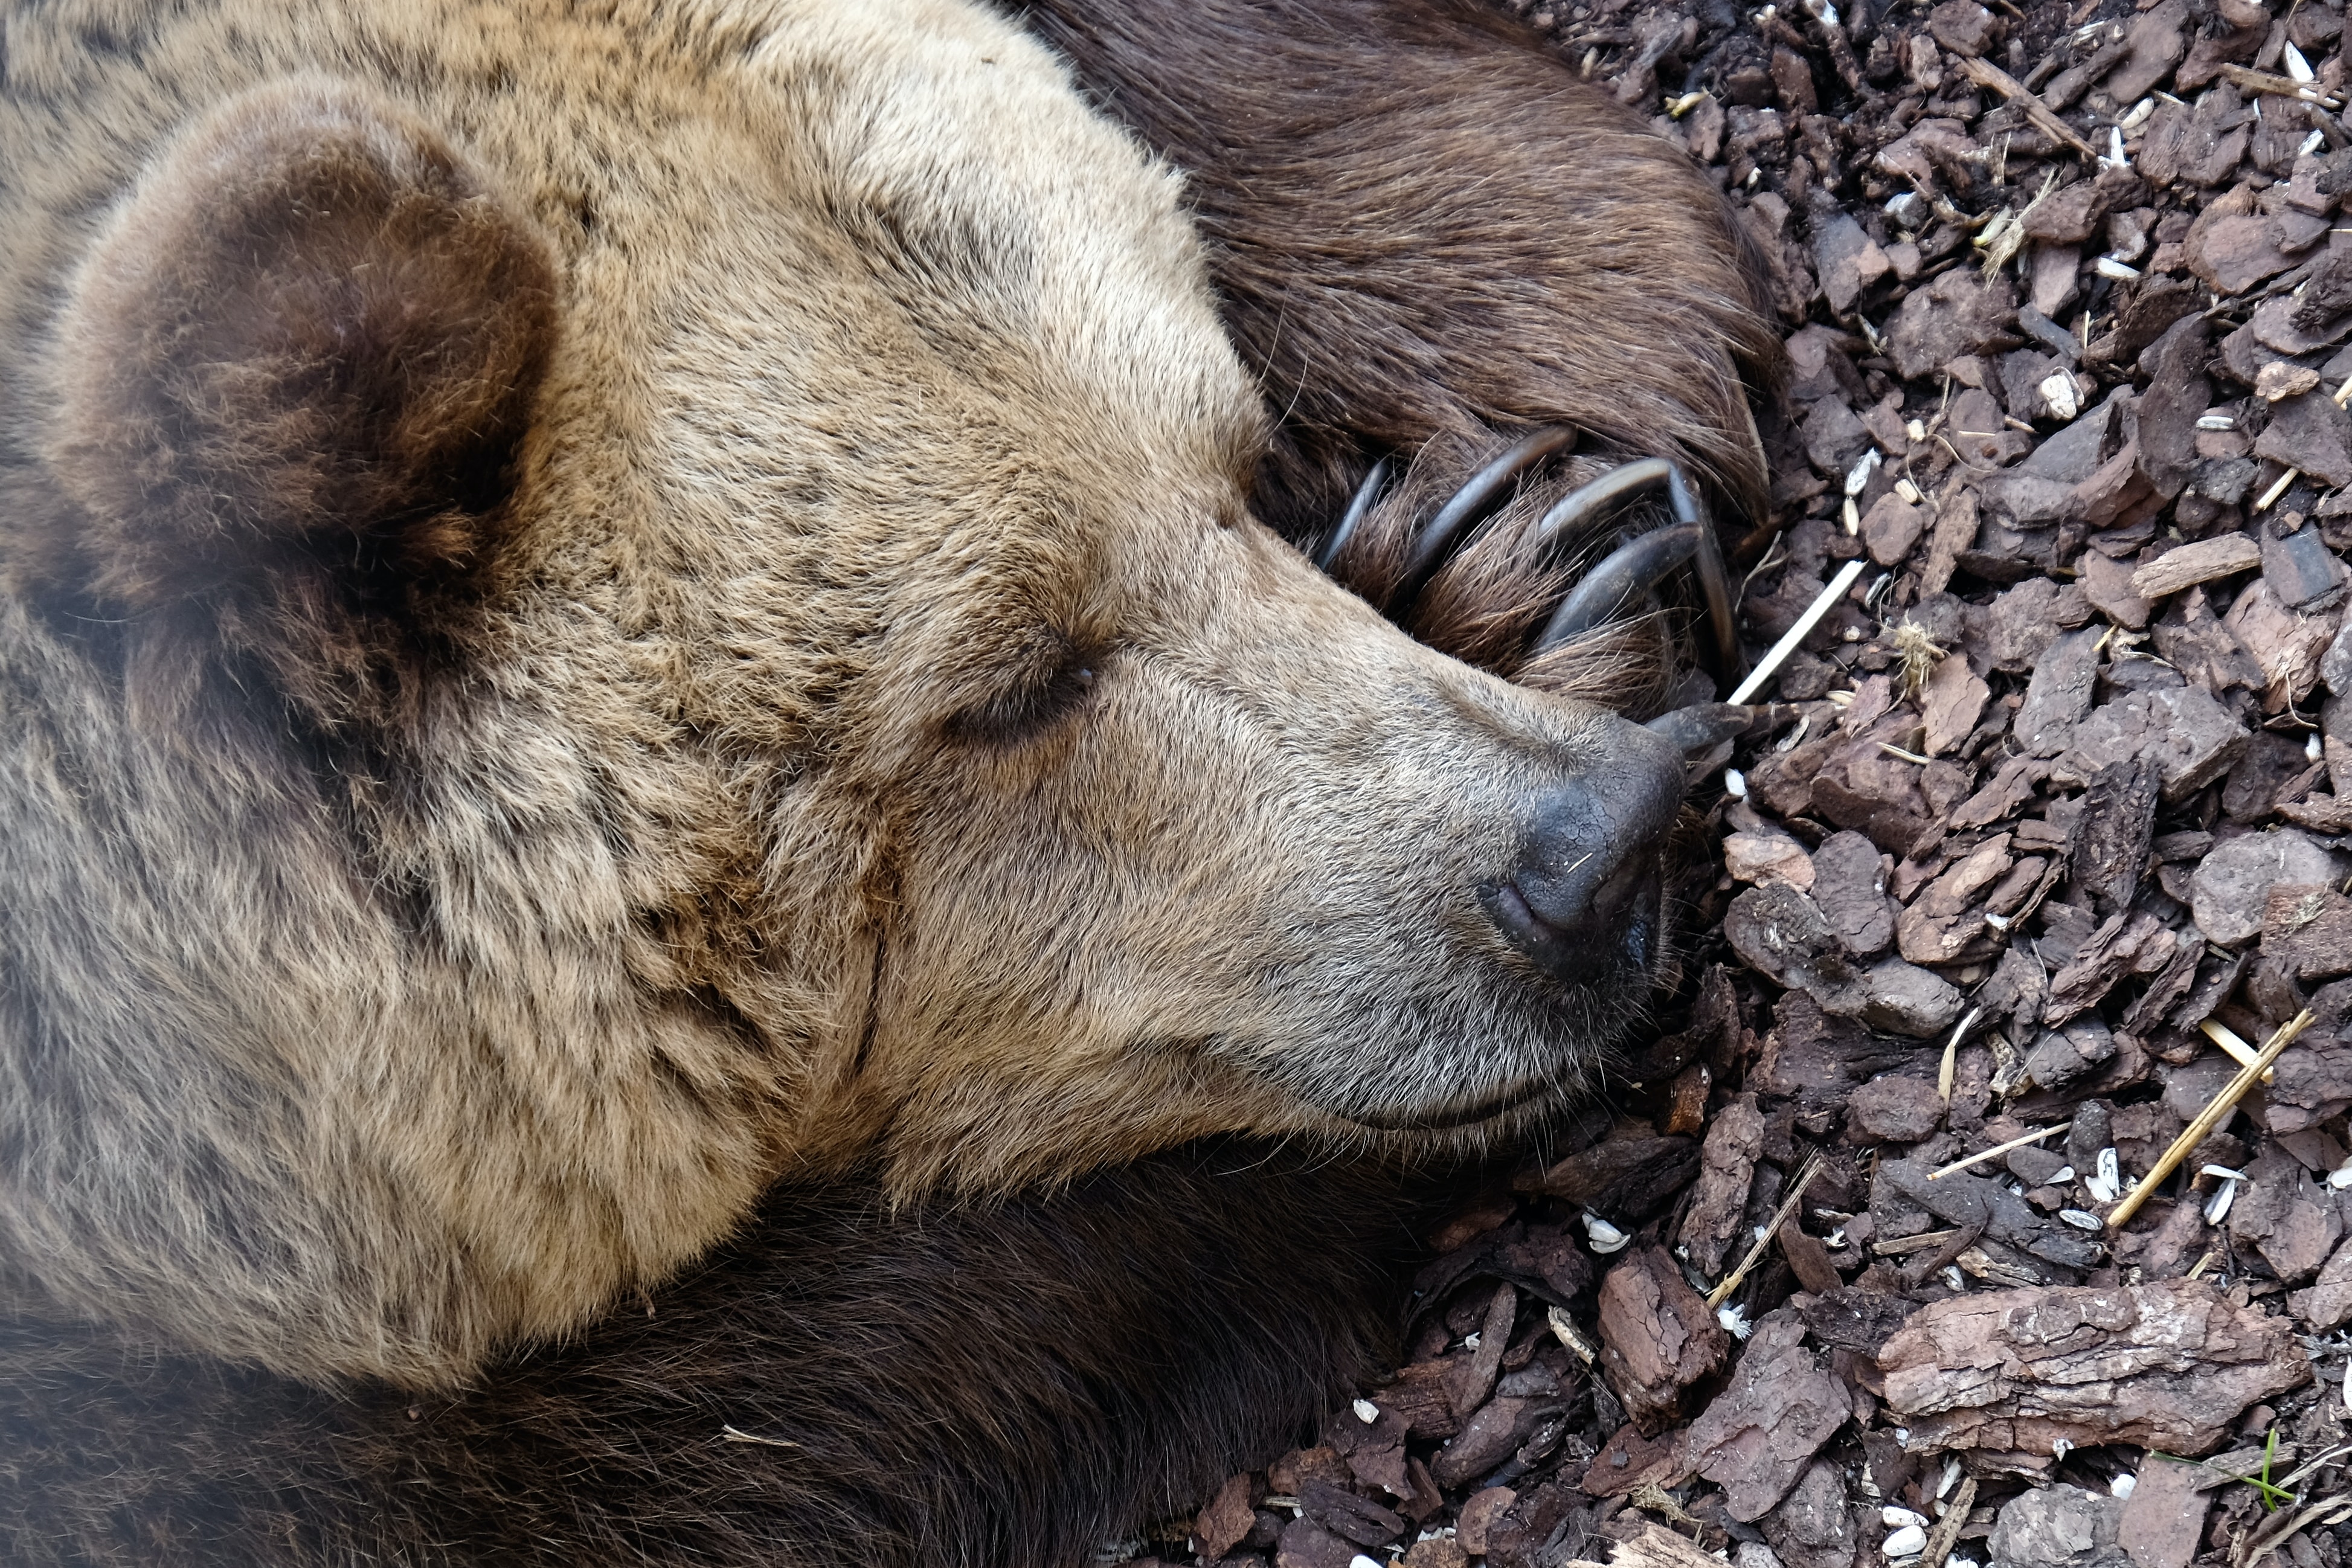 Climate change is affecting bears, and humans need to learn more to avoid conflicts